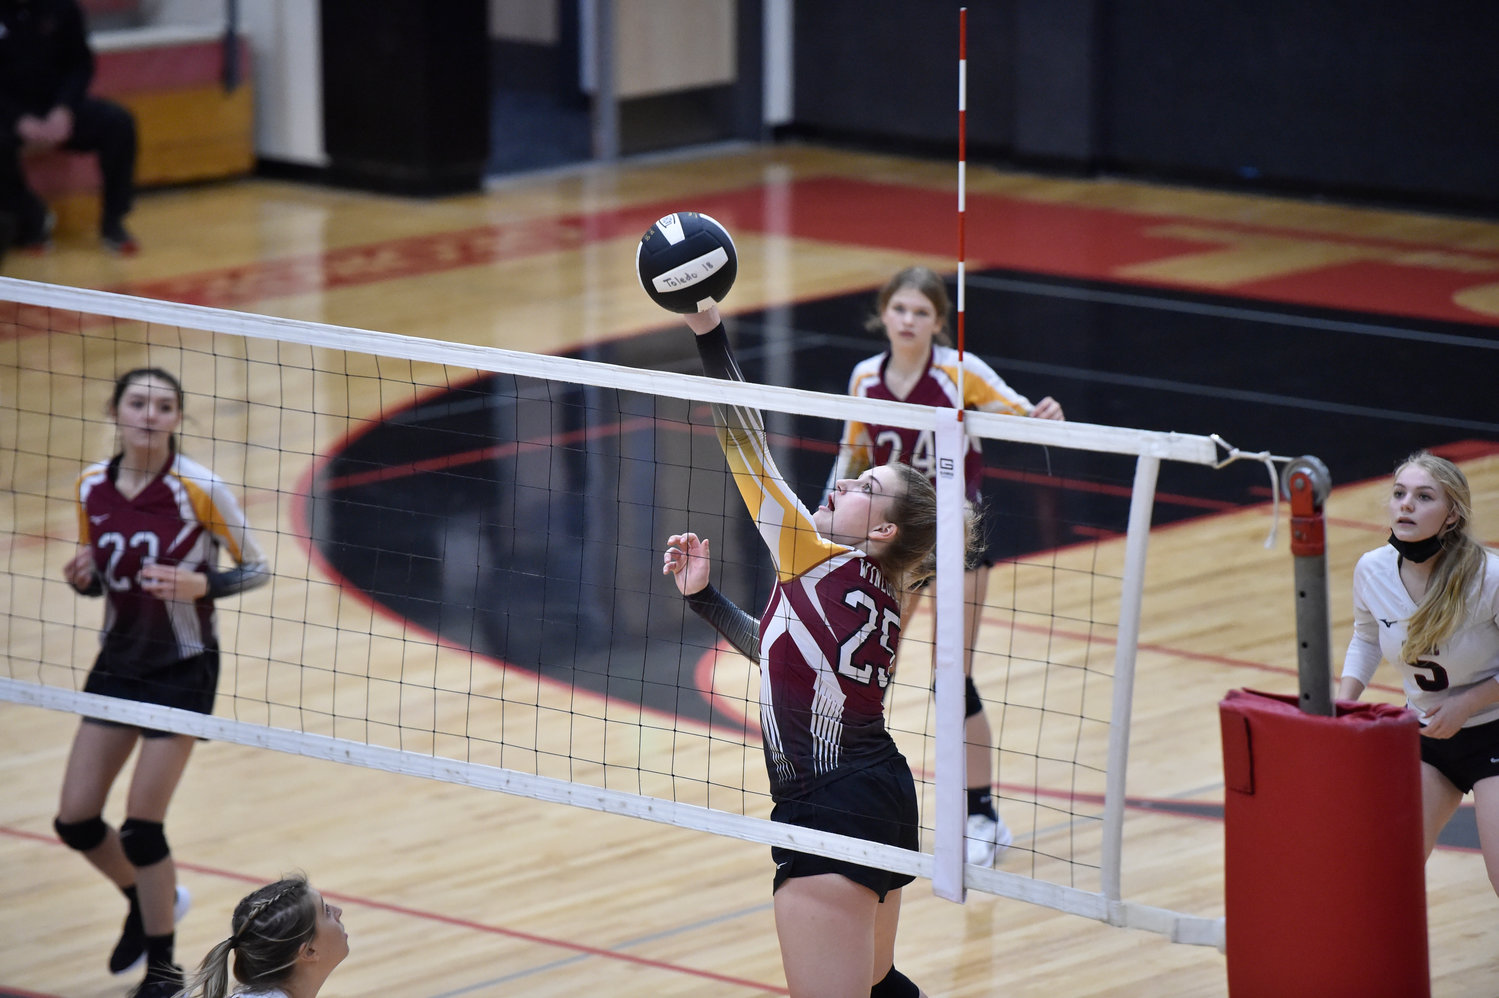 Winlock’s Addison Hall (25) tips the ball over the net in a match against Toledo on Monday, Oct. 25, in Toledo.